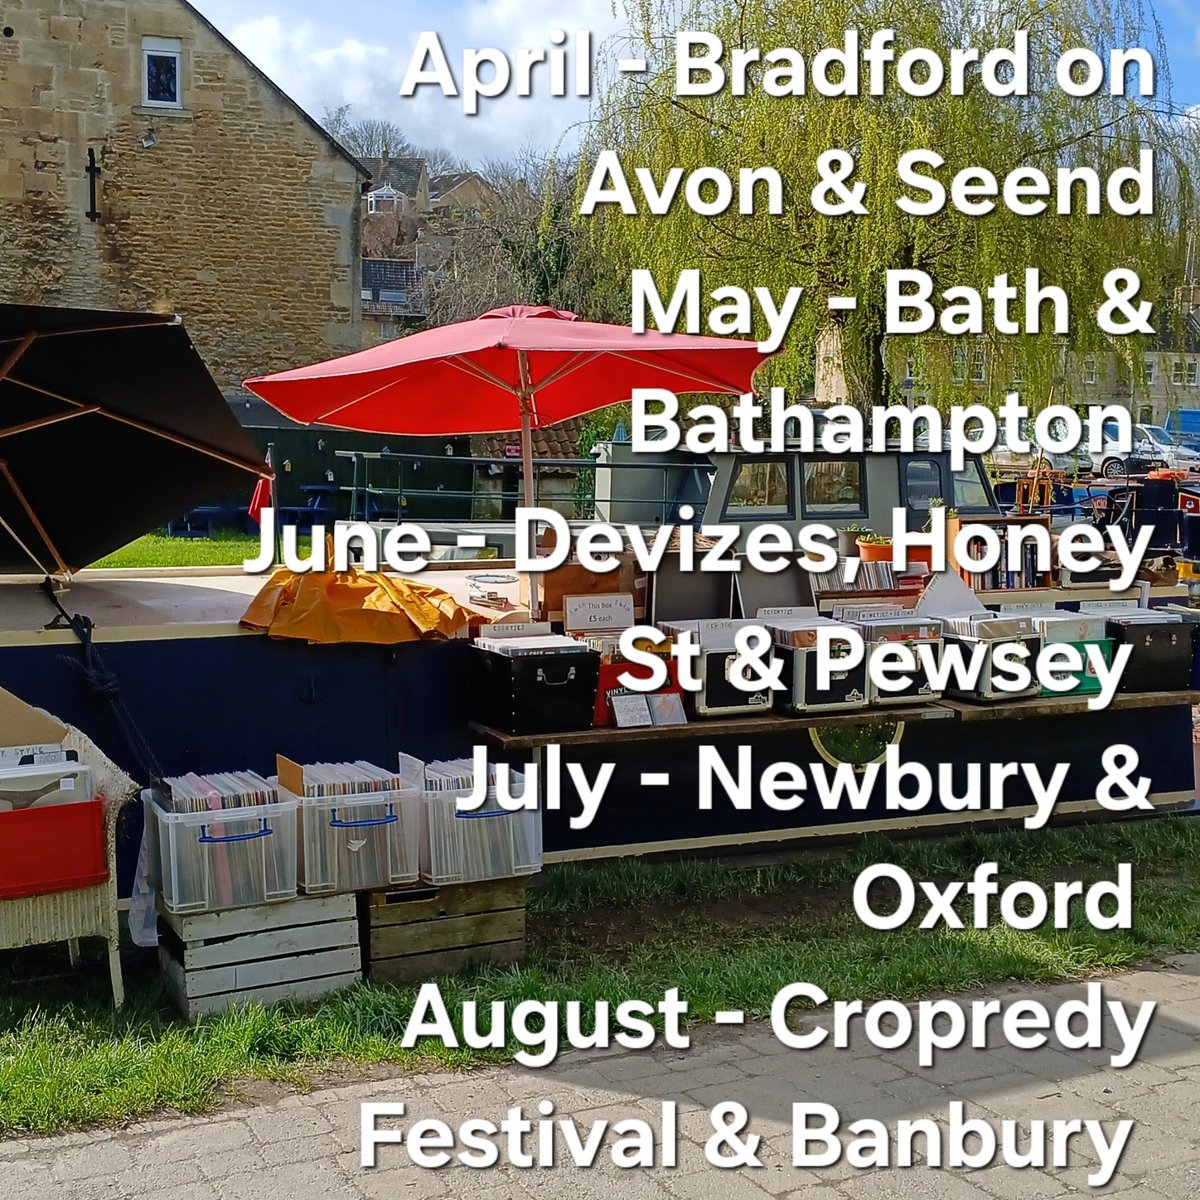 Visit us this summer 🛥💨🎶🎵🎶 It'll stop raining soon 😋🙌 April - BOA and Seend May - Bath and Bathampton June - Devizes, Honey St and Pewsey July - Bedwyn, Newbury and Oxford August- Cropredy Festival and Banbury #canaltraders #buyitoffaboat